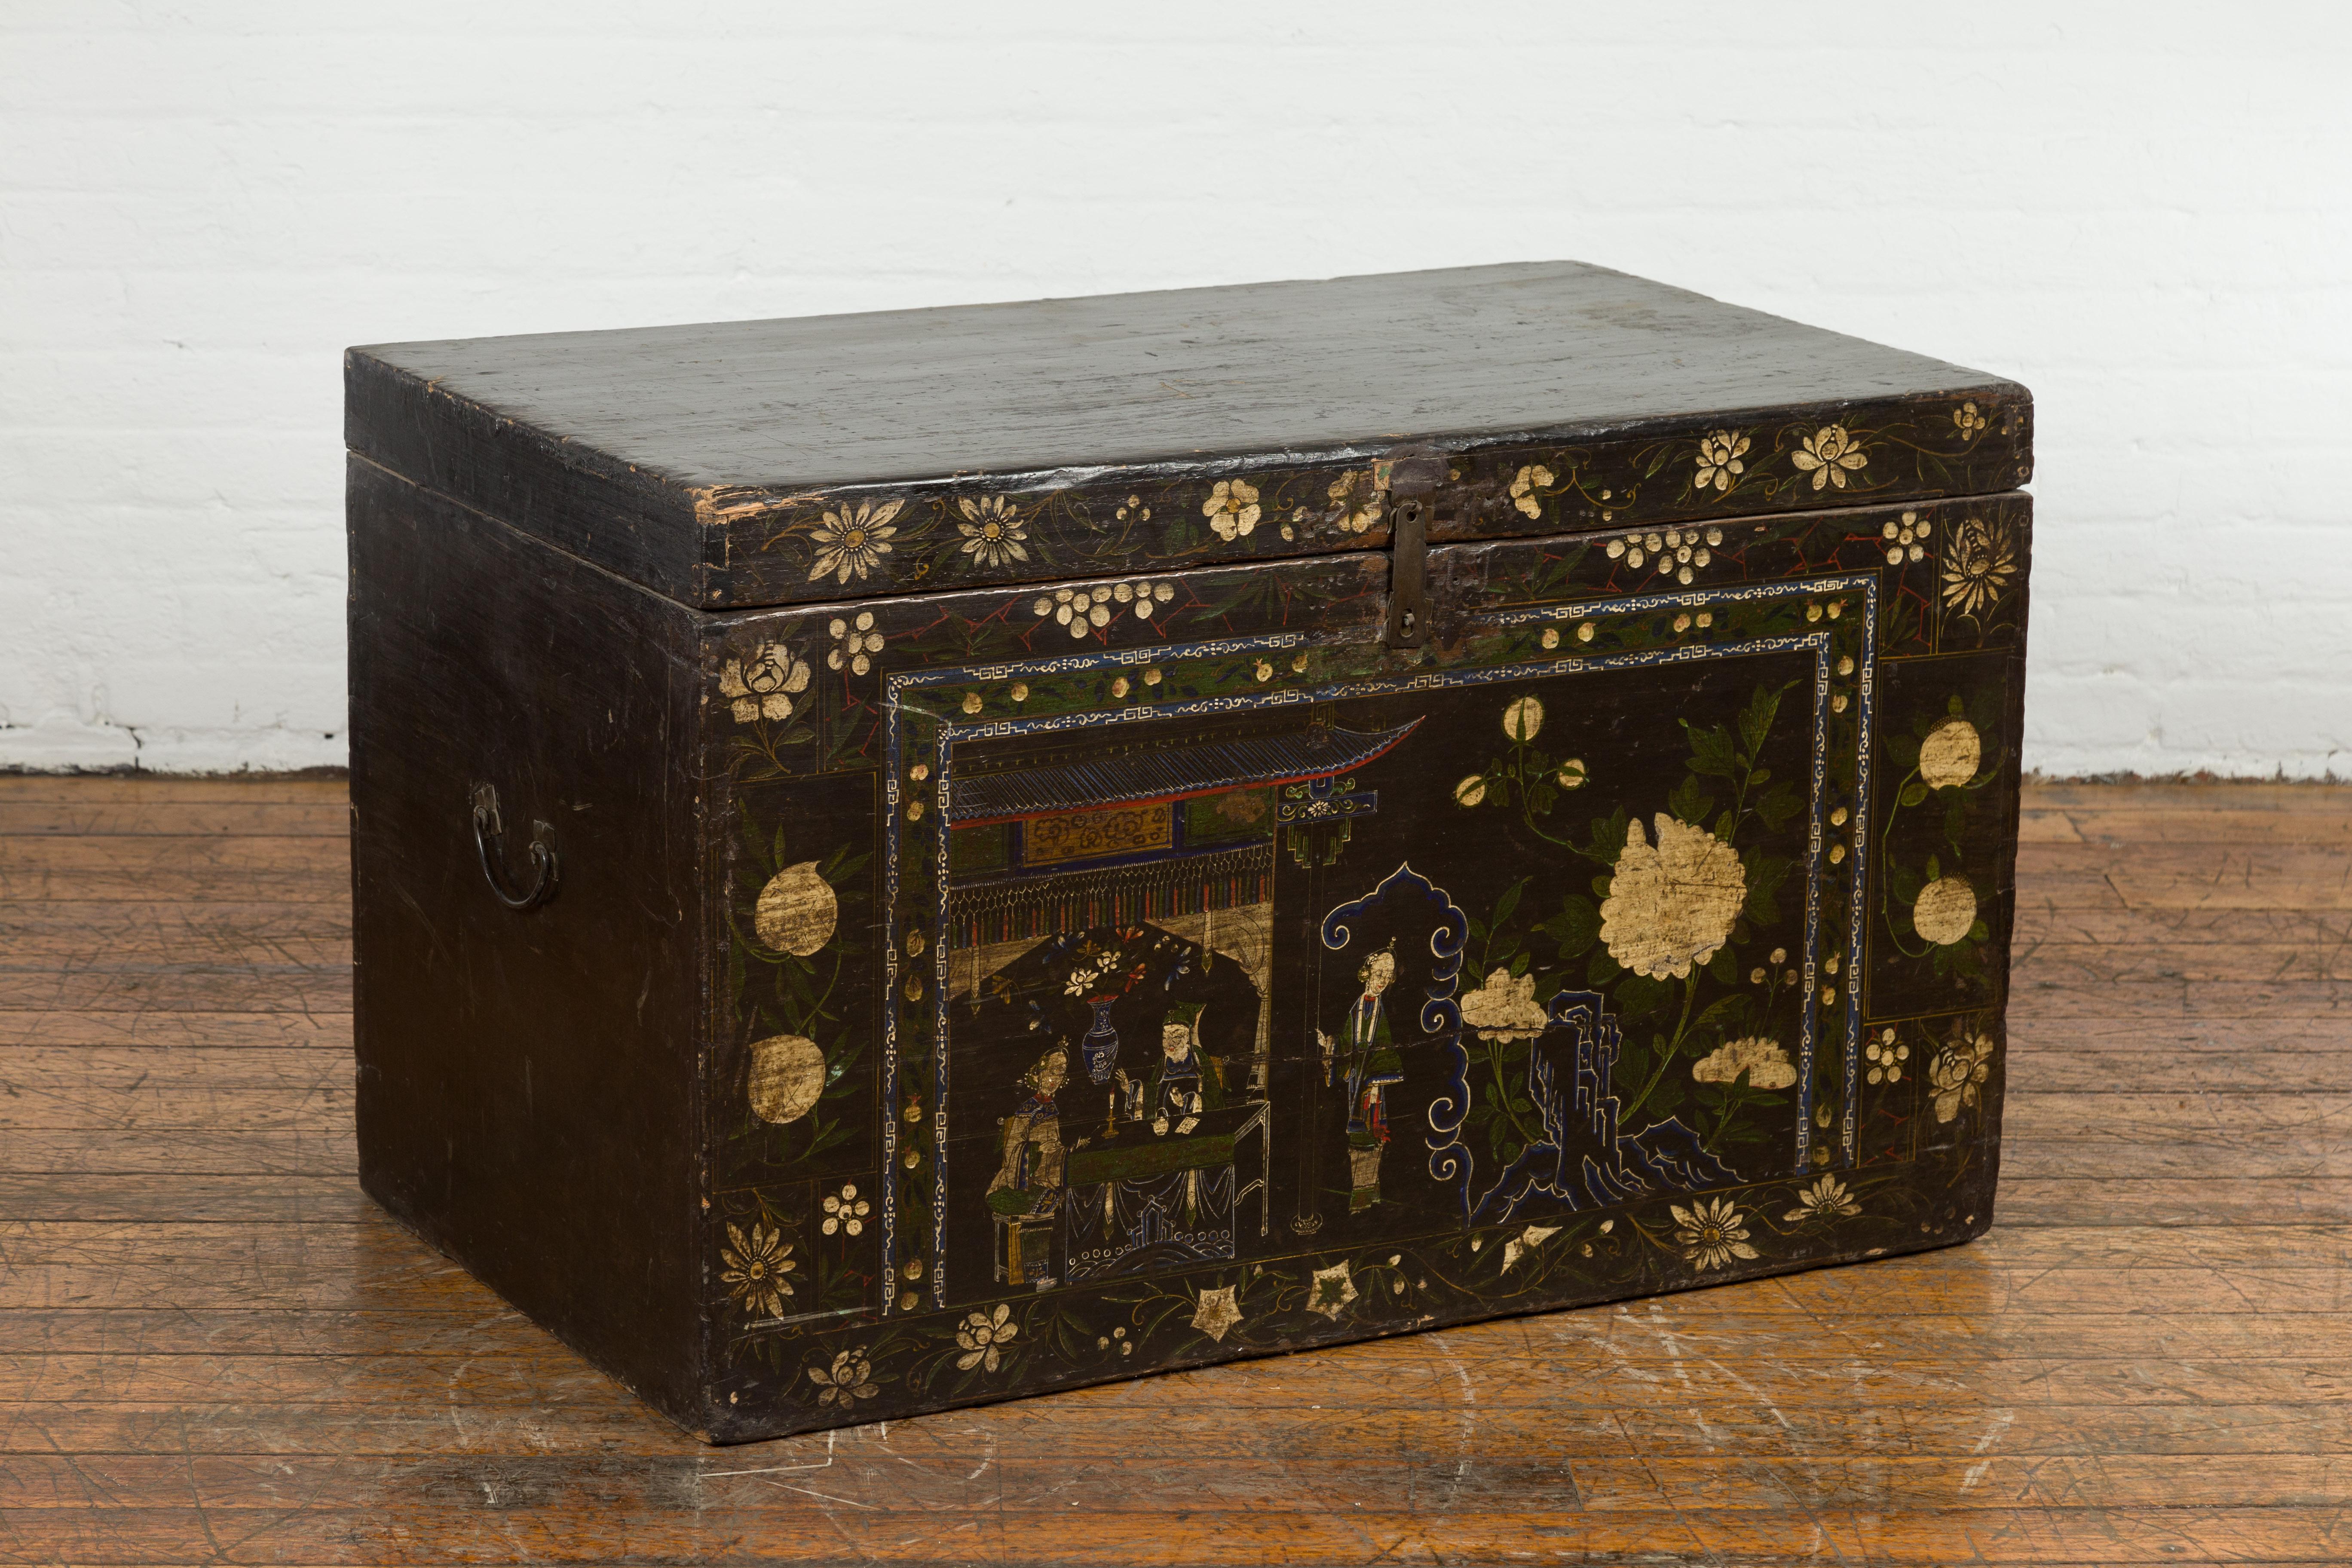 A vintage Chinese black lacquered blanket chest from the mid 20th century with hand-painted décor. Exhibiting the vibrant richness of mid 20th-century Chinese artistry, this vintage black lacquered blanket chest is a true expression of functional